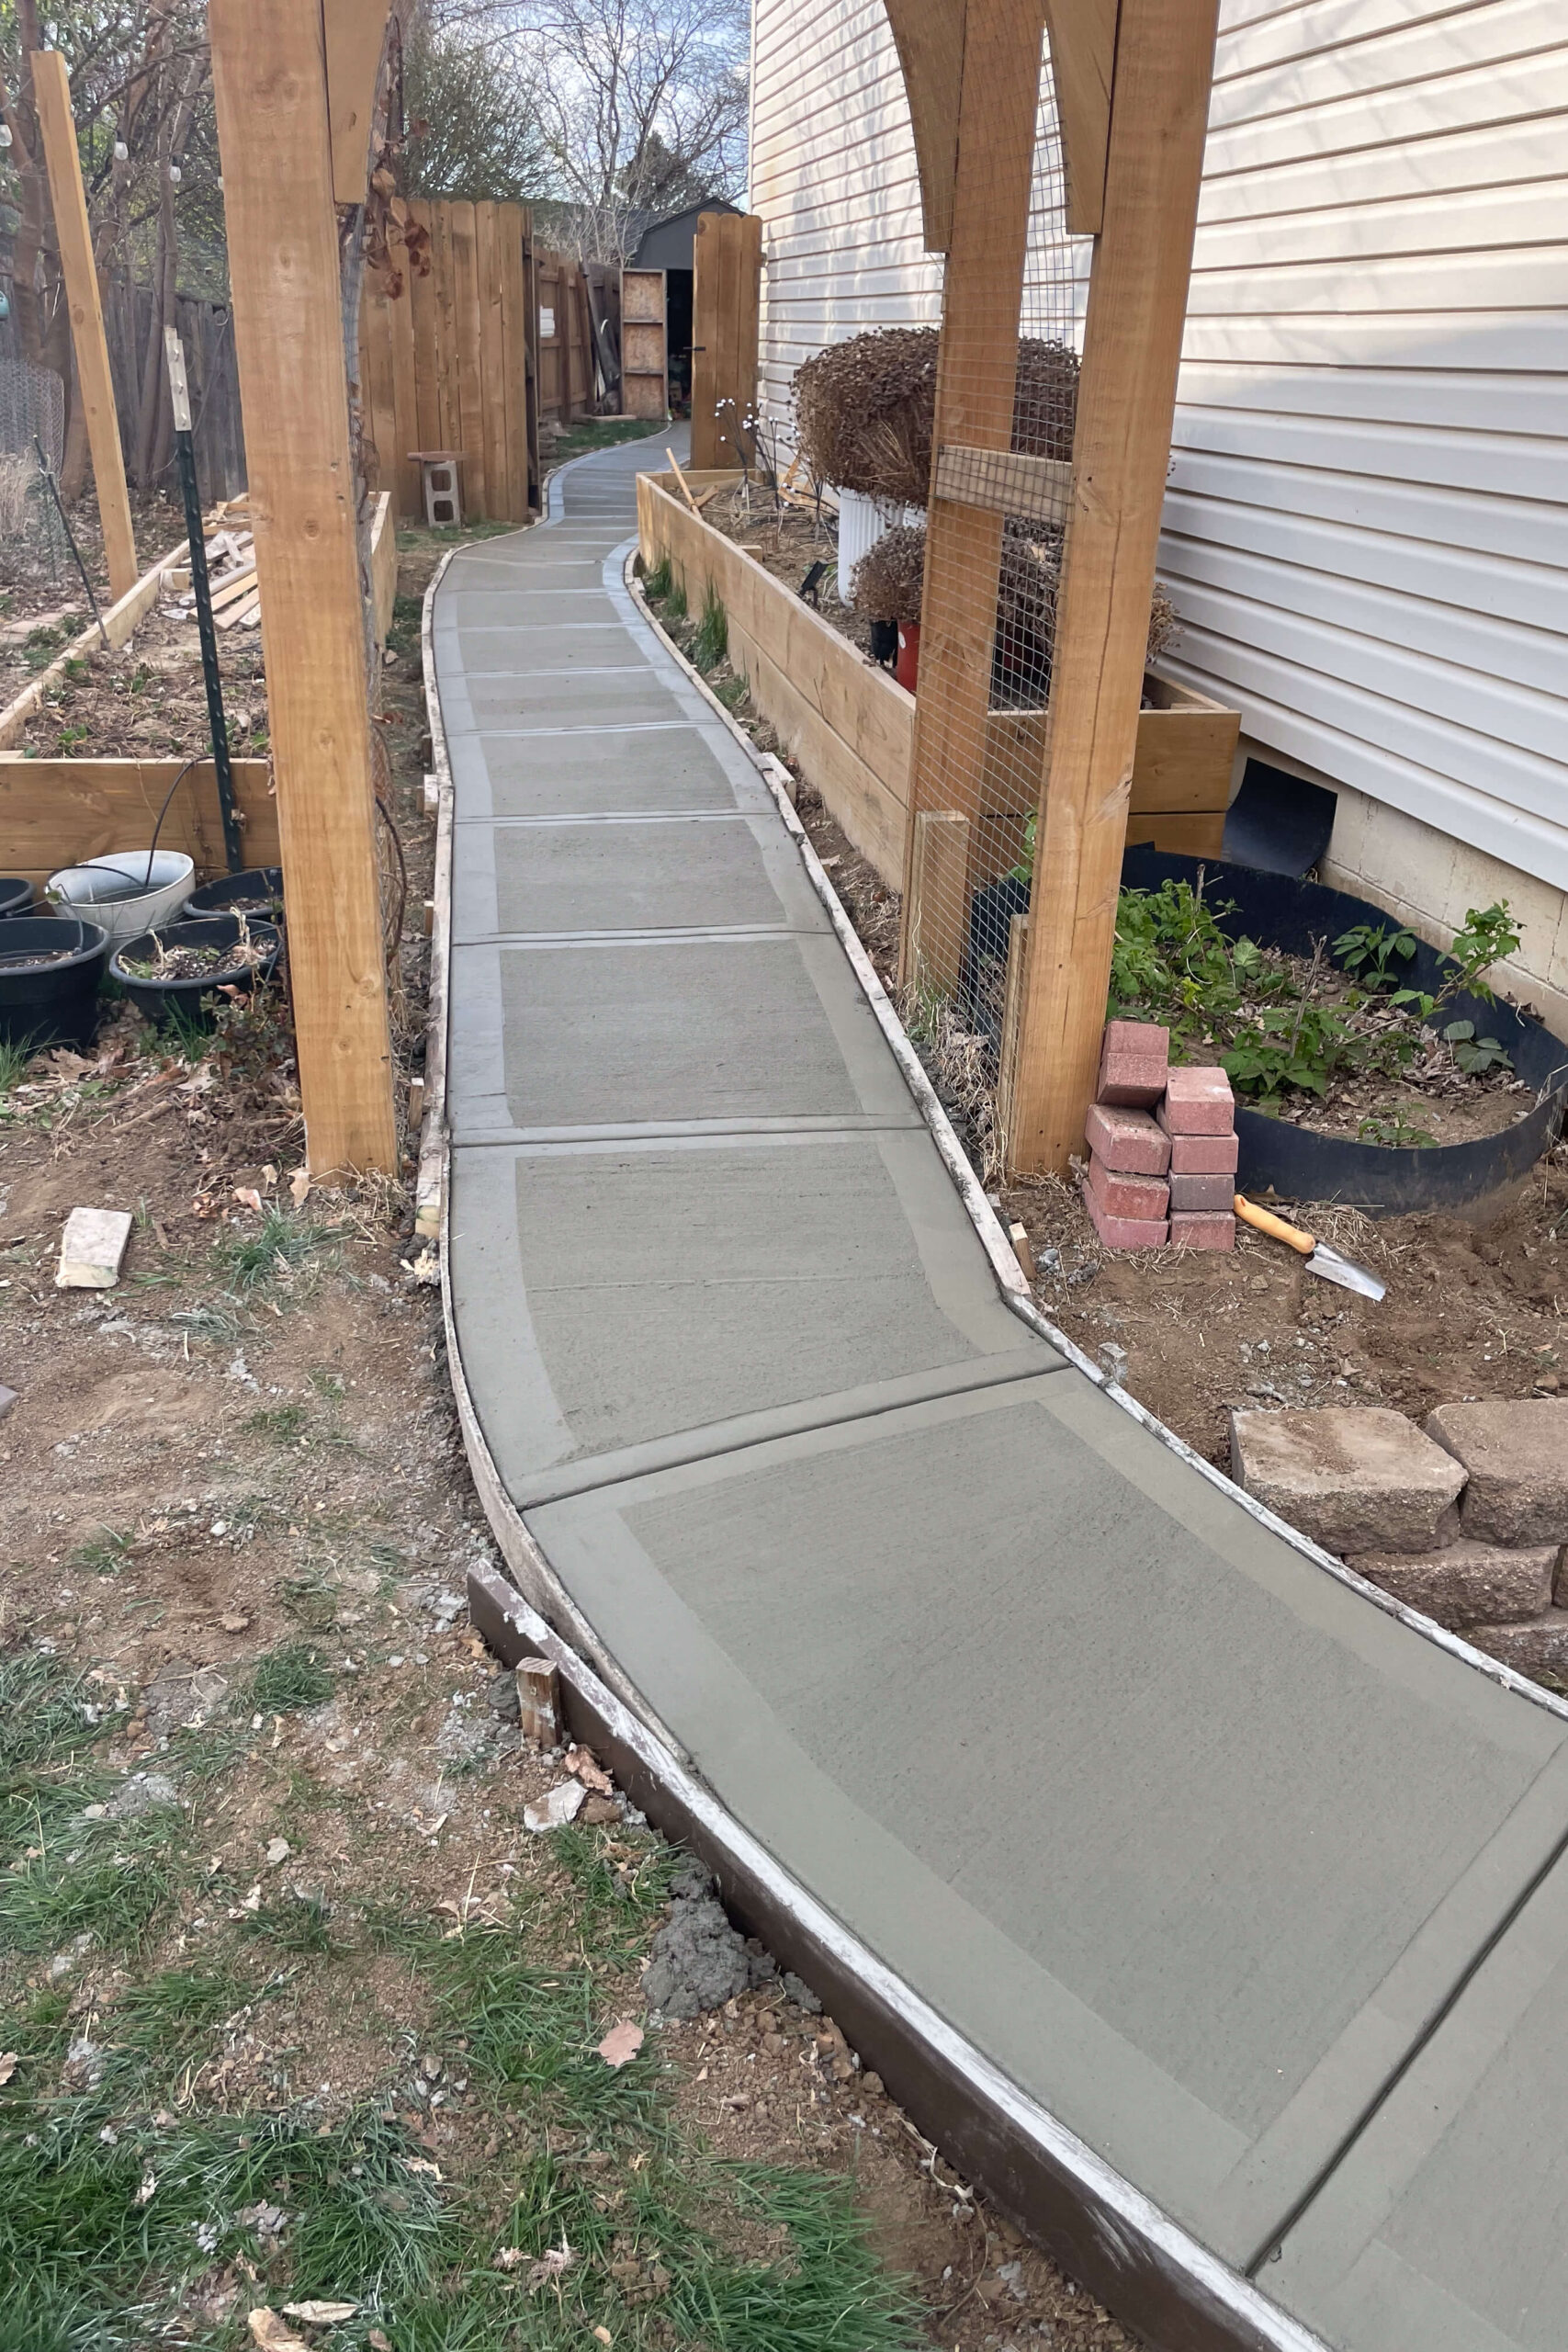 Finished concrete sidewalk done by workers I hired from facebook marketplace.